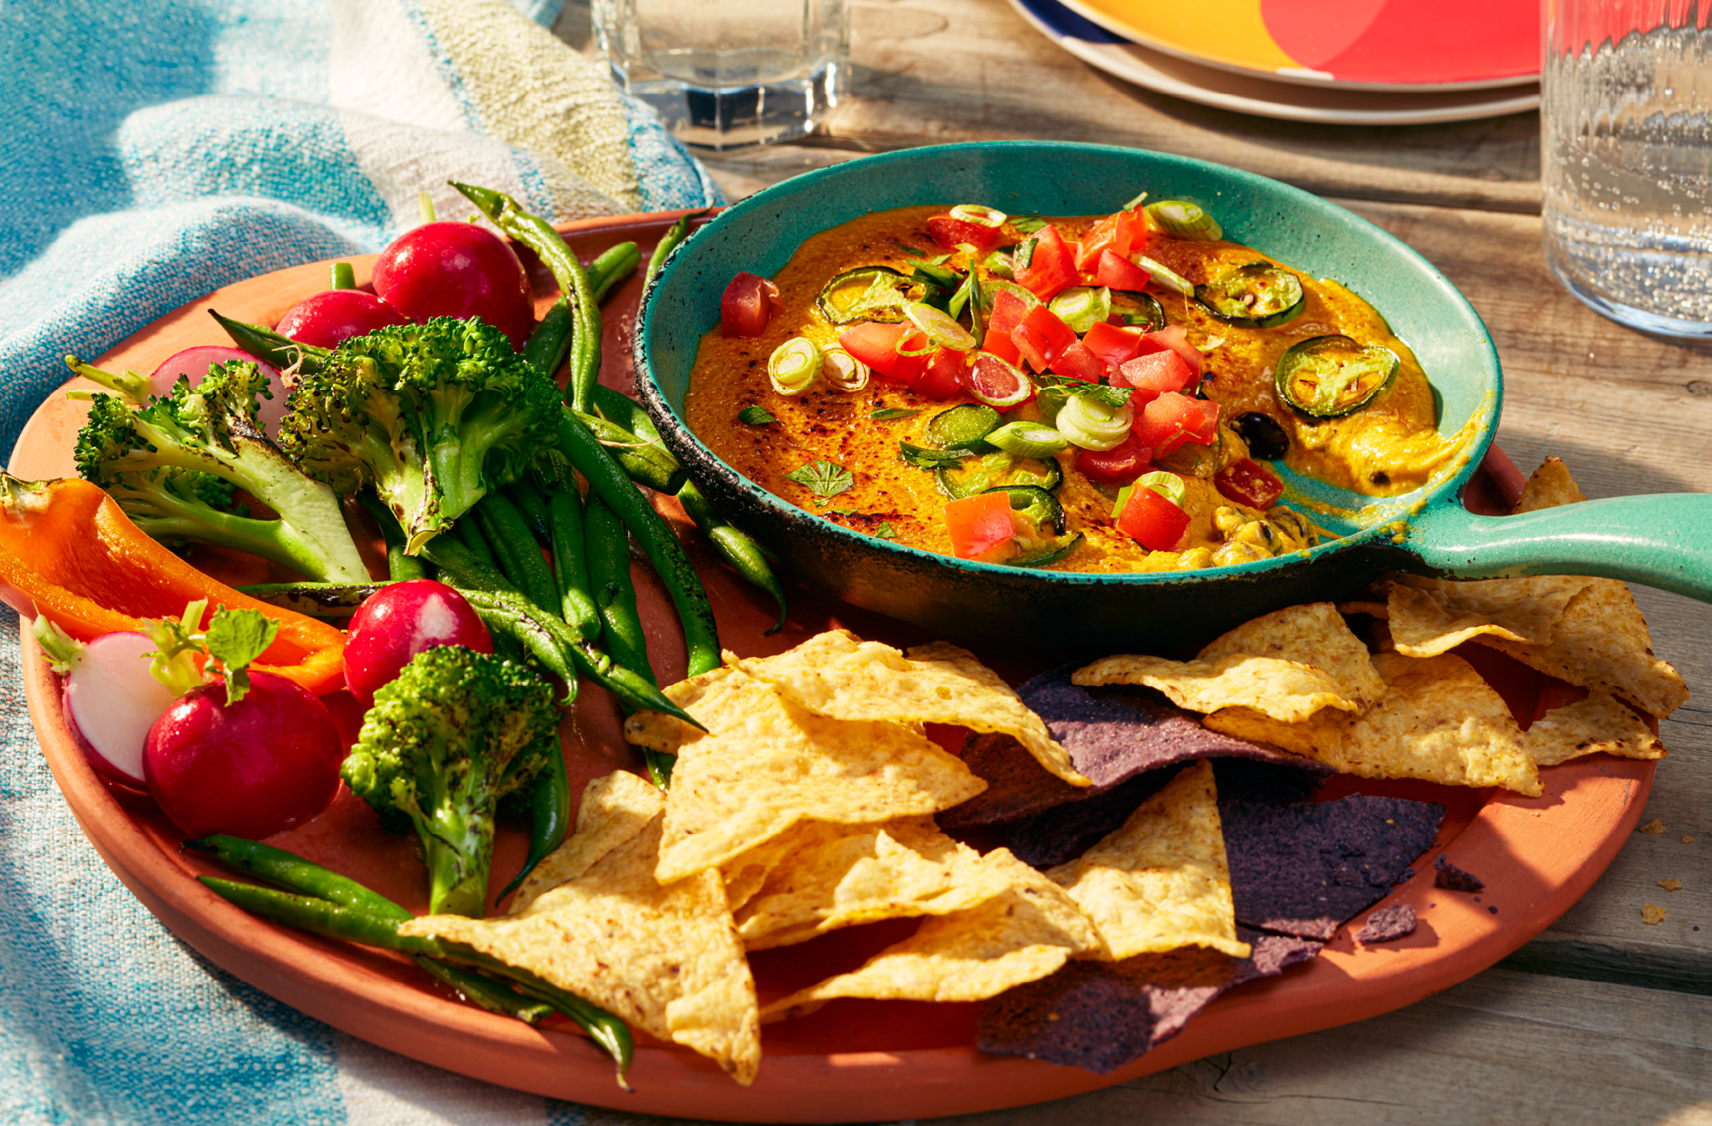 A serving tray filled with veggies, broccoli, tomatoes, sliced peppers and a side bowl filled with a Vegan Southwest Queso-Style Dip